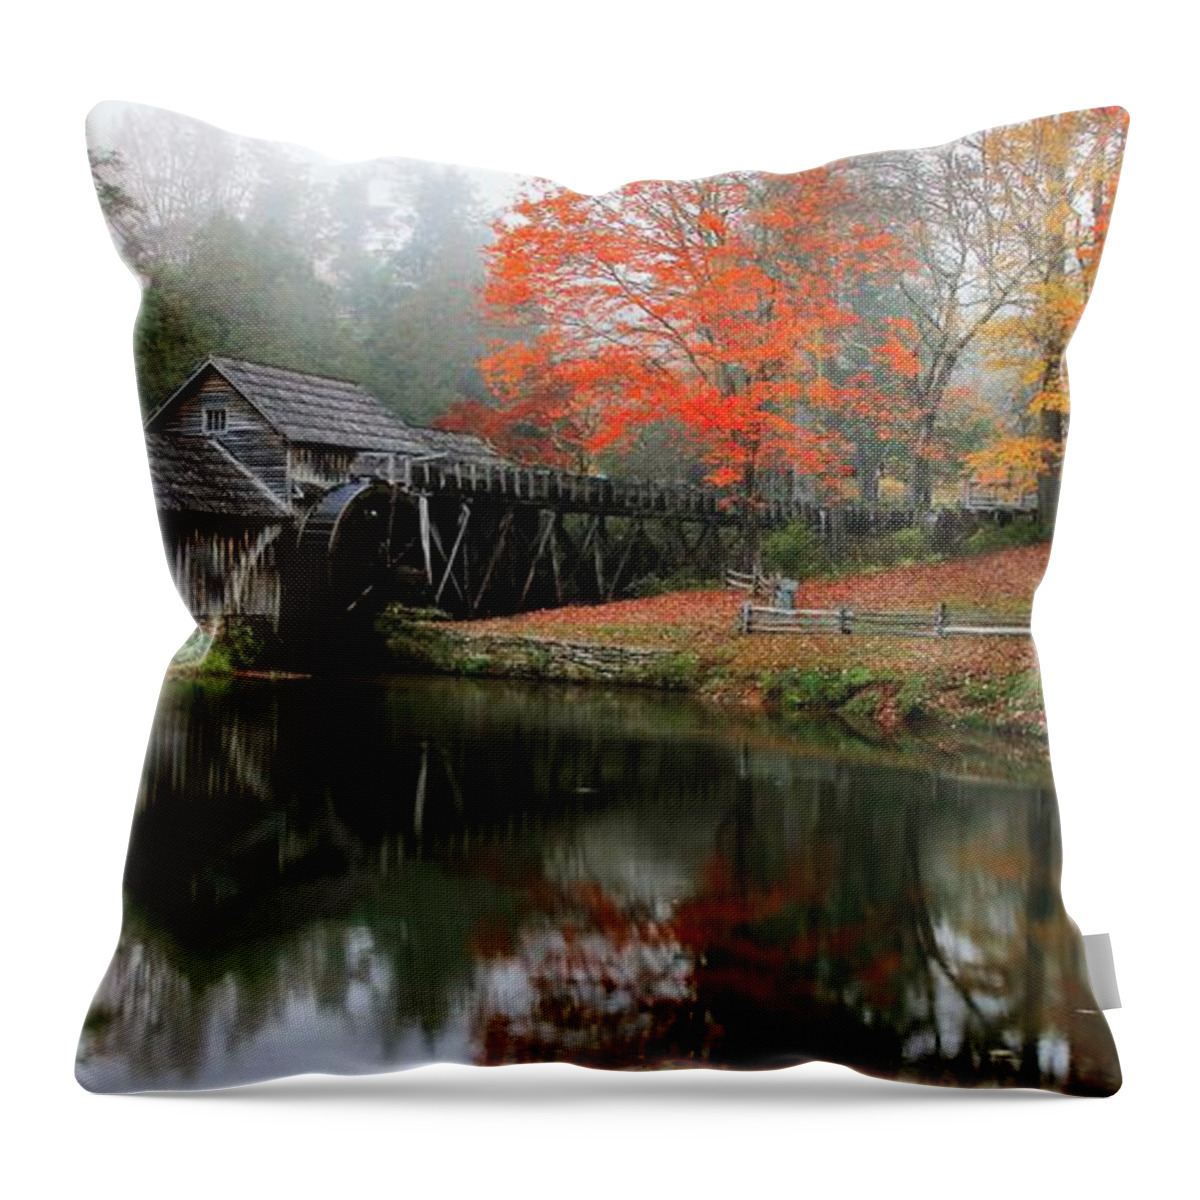 Mabry Mill Throw Pillow featuring the photograph Autumn Foggy Morning At Mabry Mill Virginia by Carol Montoya